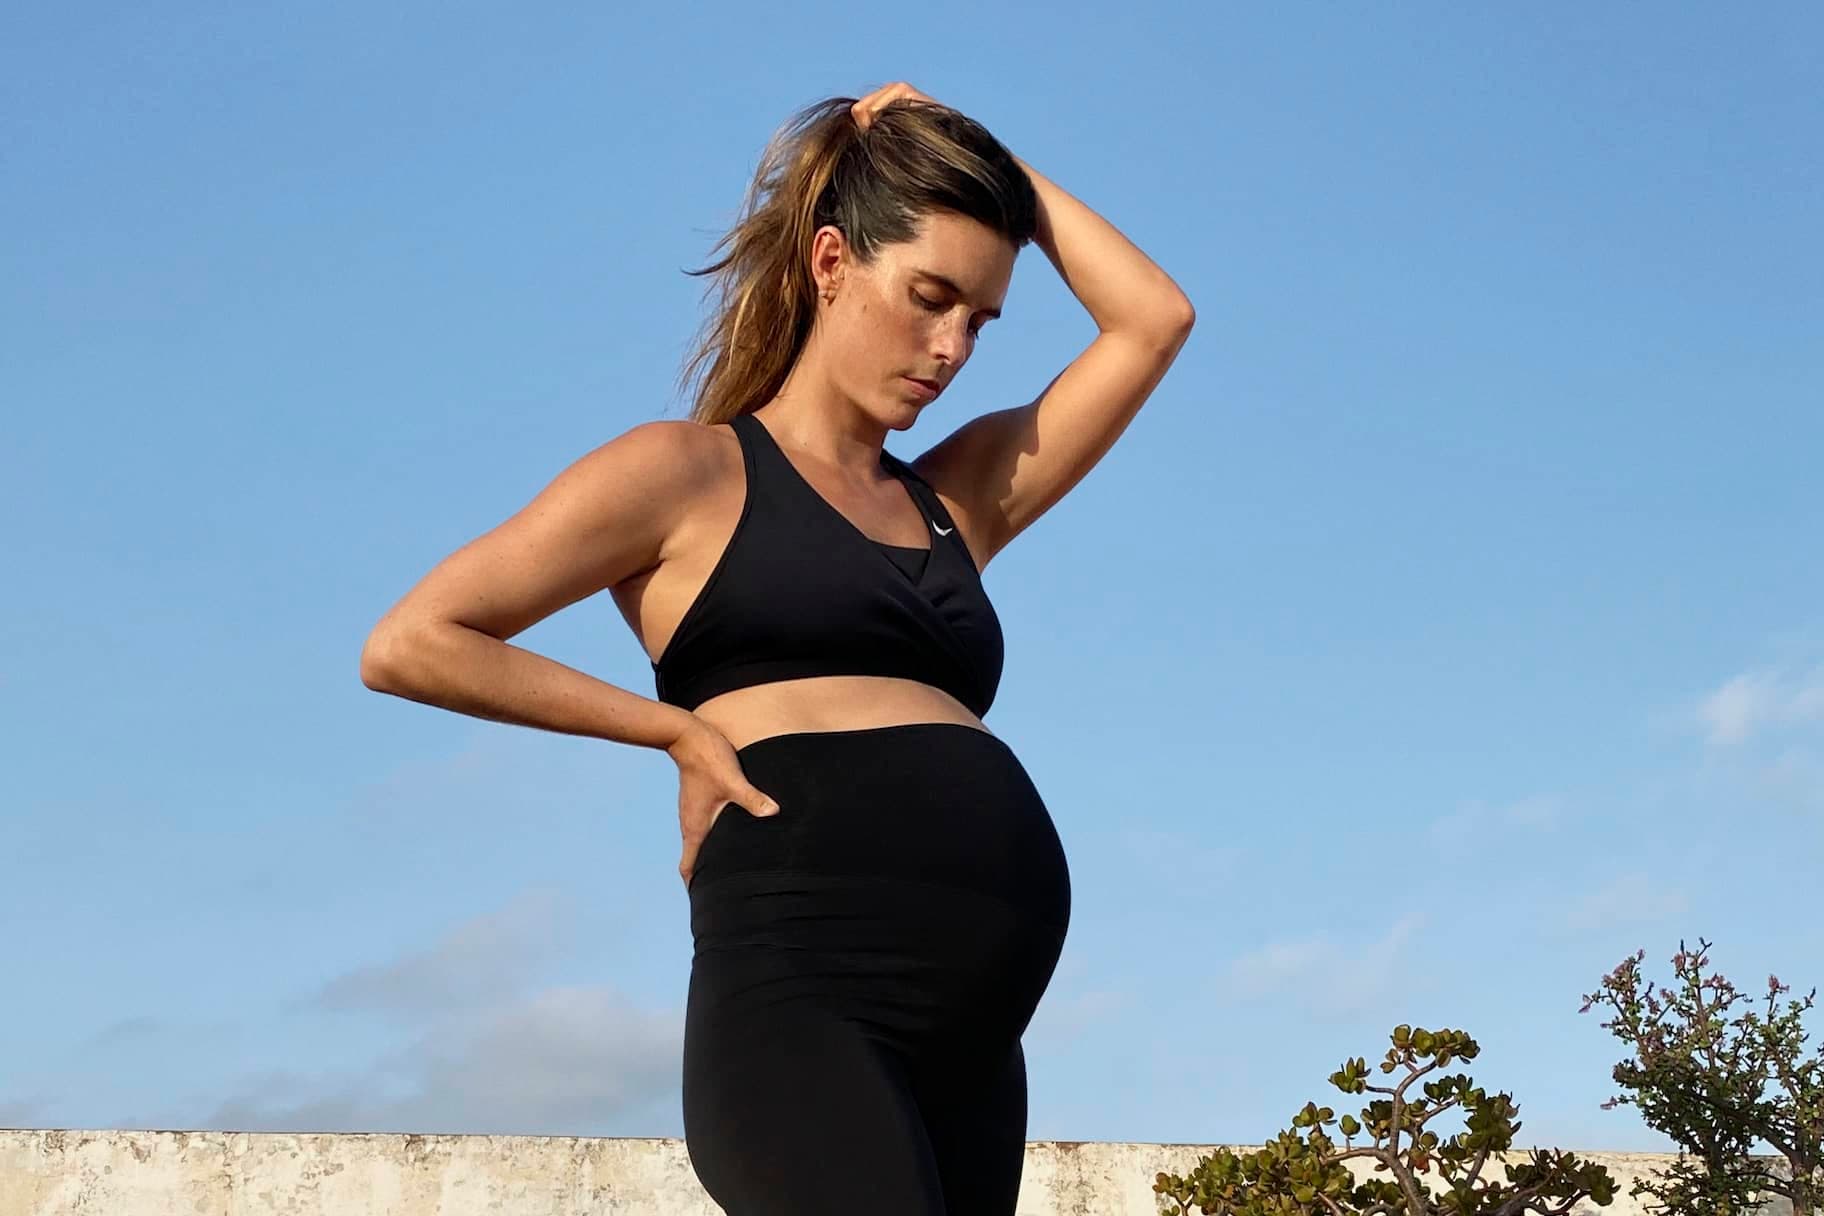 Maternity Yoga Clothes: What to Wear When Pregnant. Nike UK